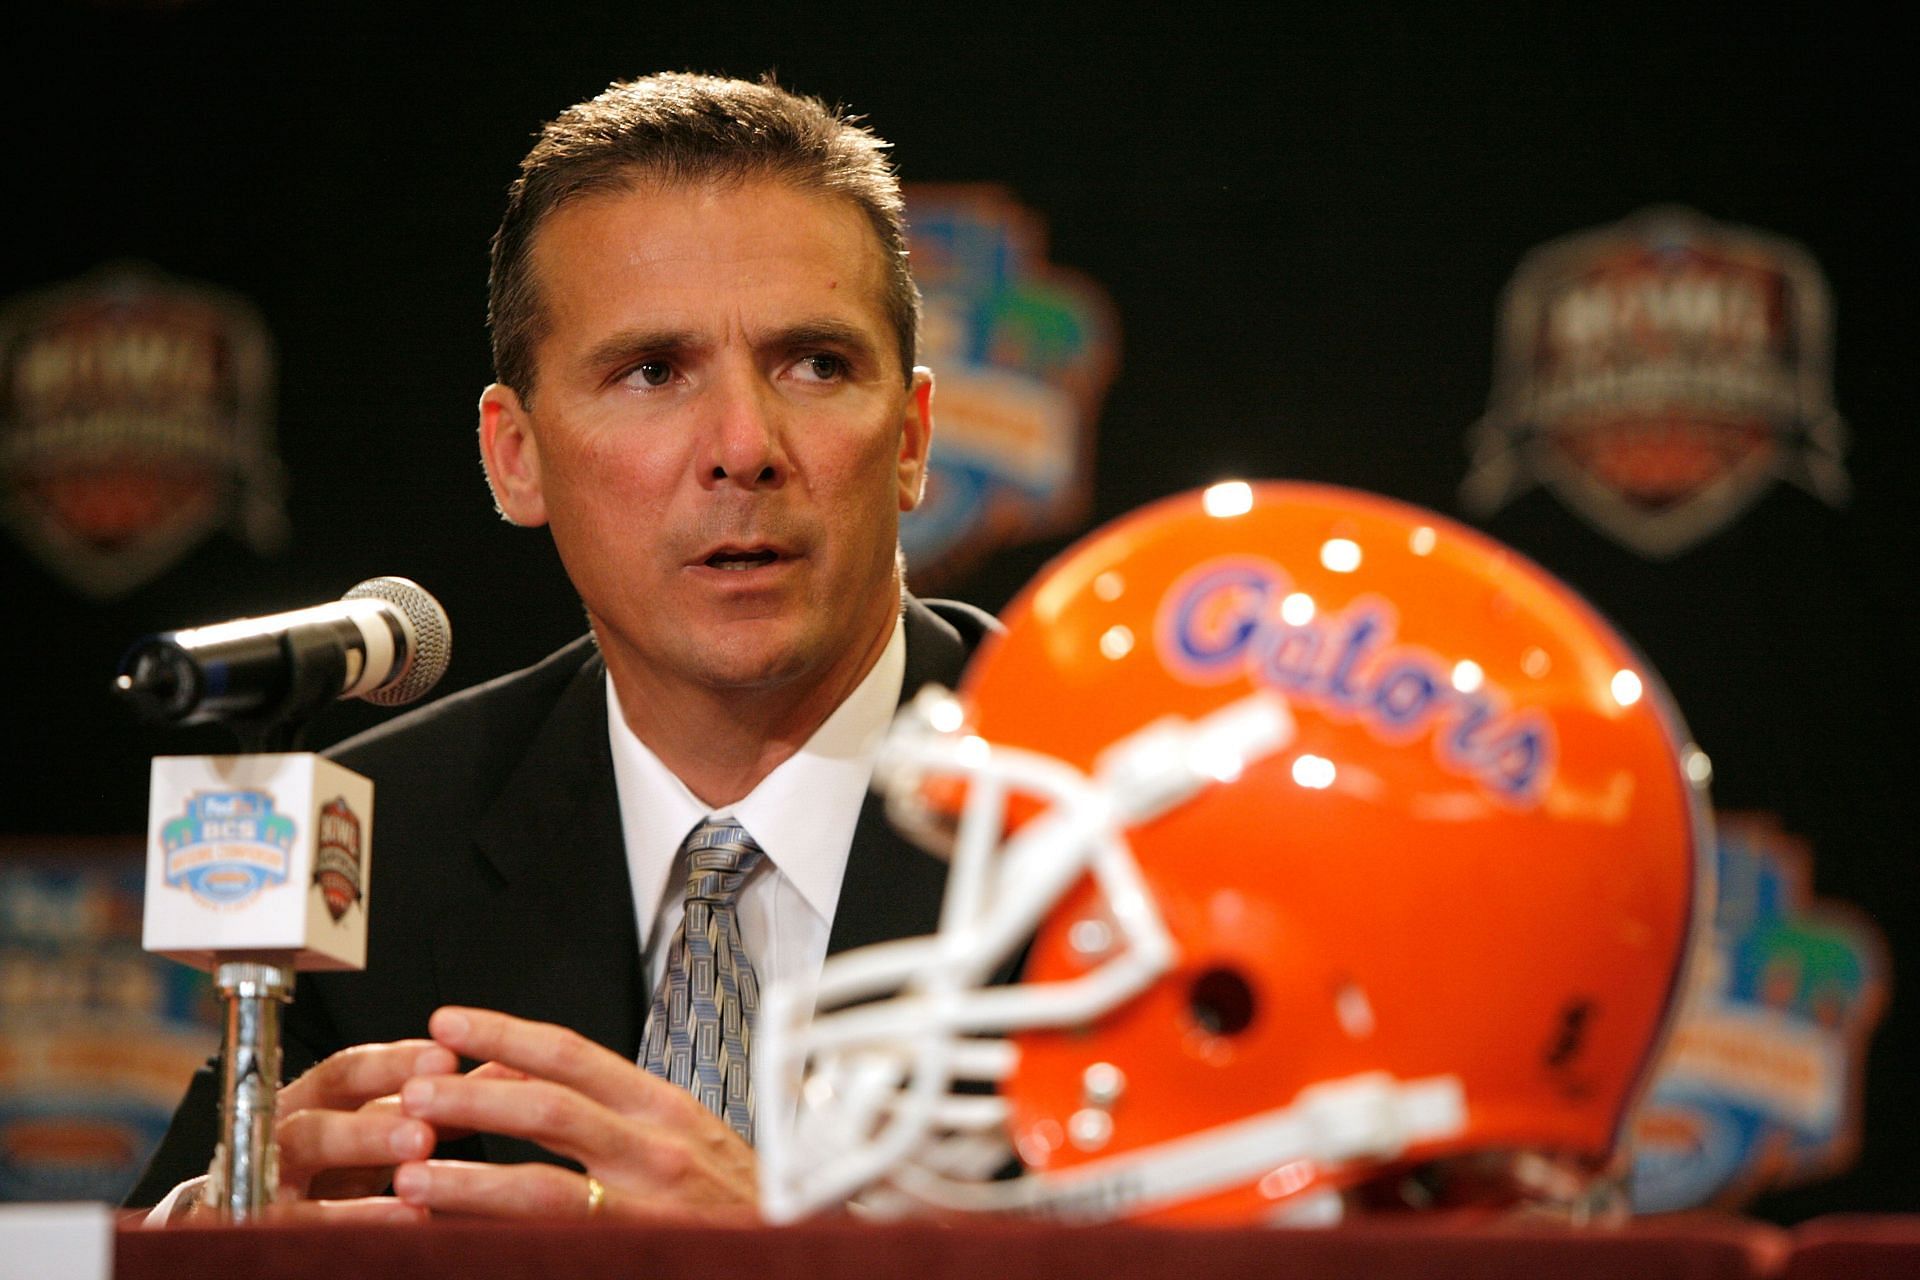 Meyer first came to national fame as the Gators coach in the 2000s